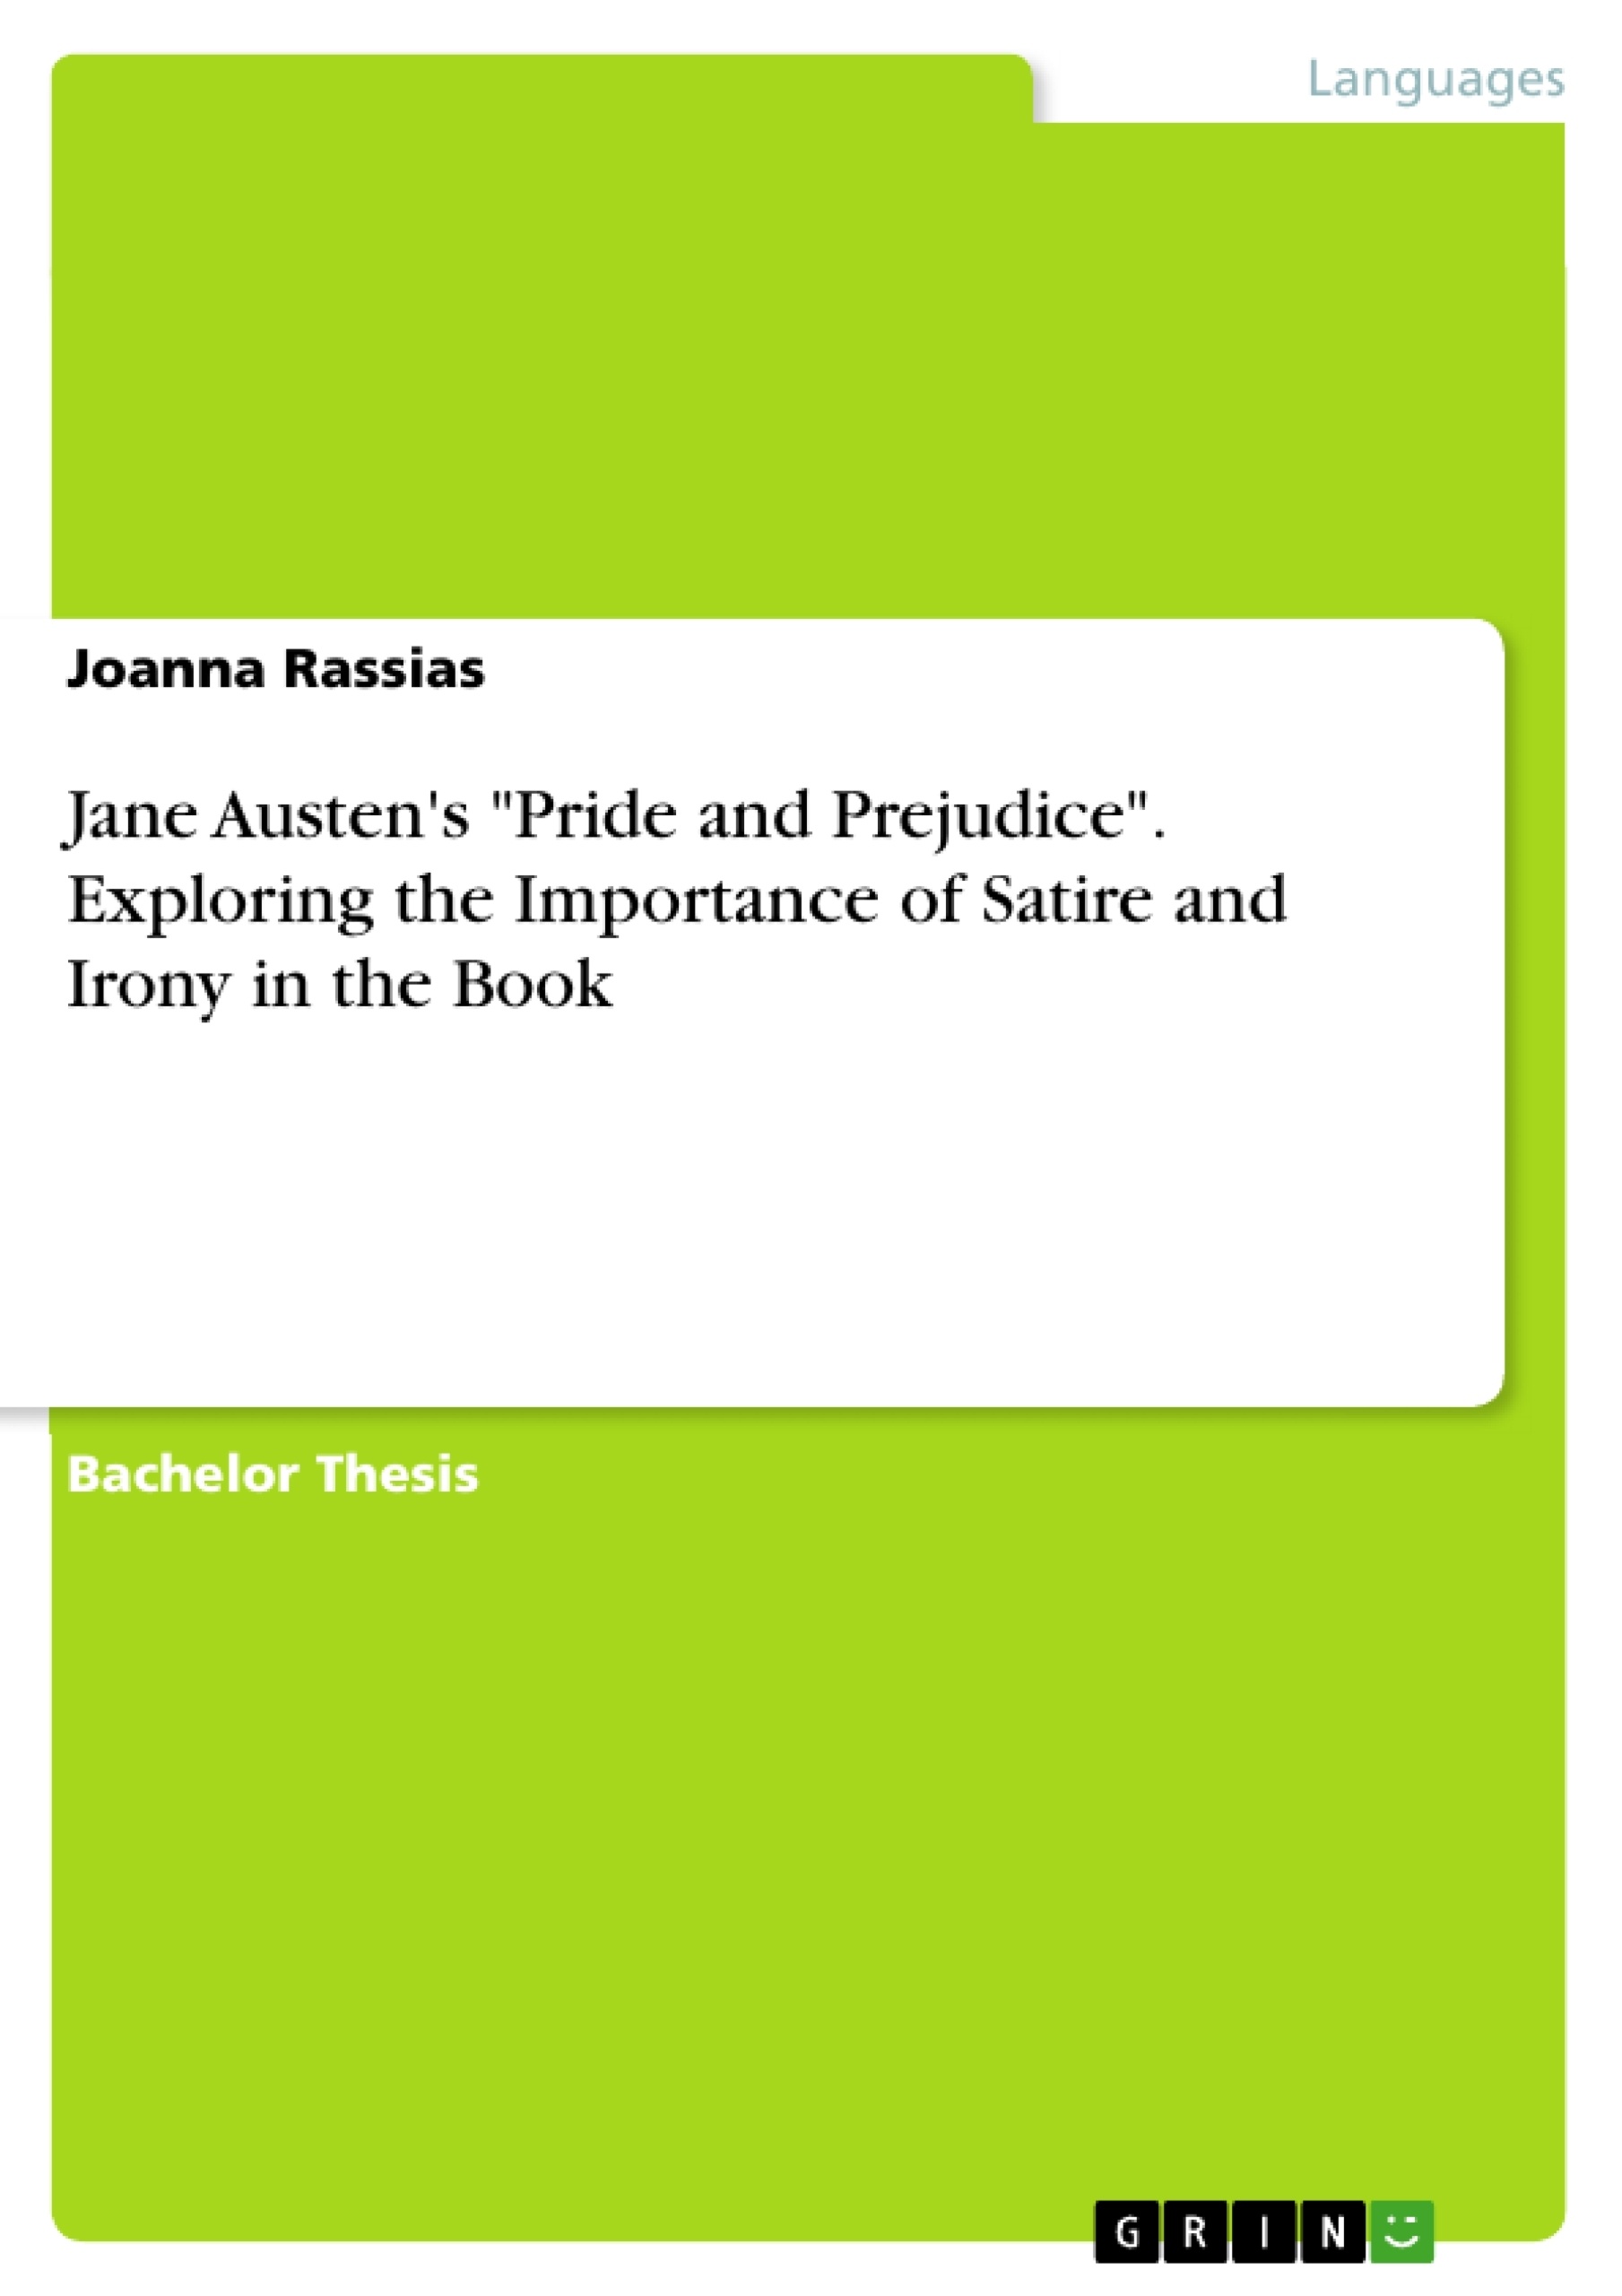 Title: Jane Austen's "Pride and Prejudice". Exploring the Importance of Satire and Irony in the Book